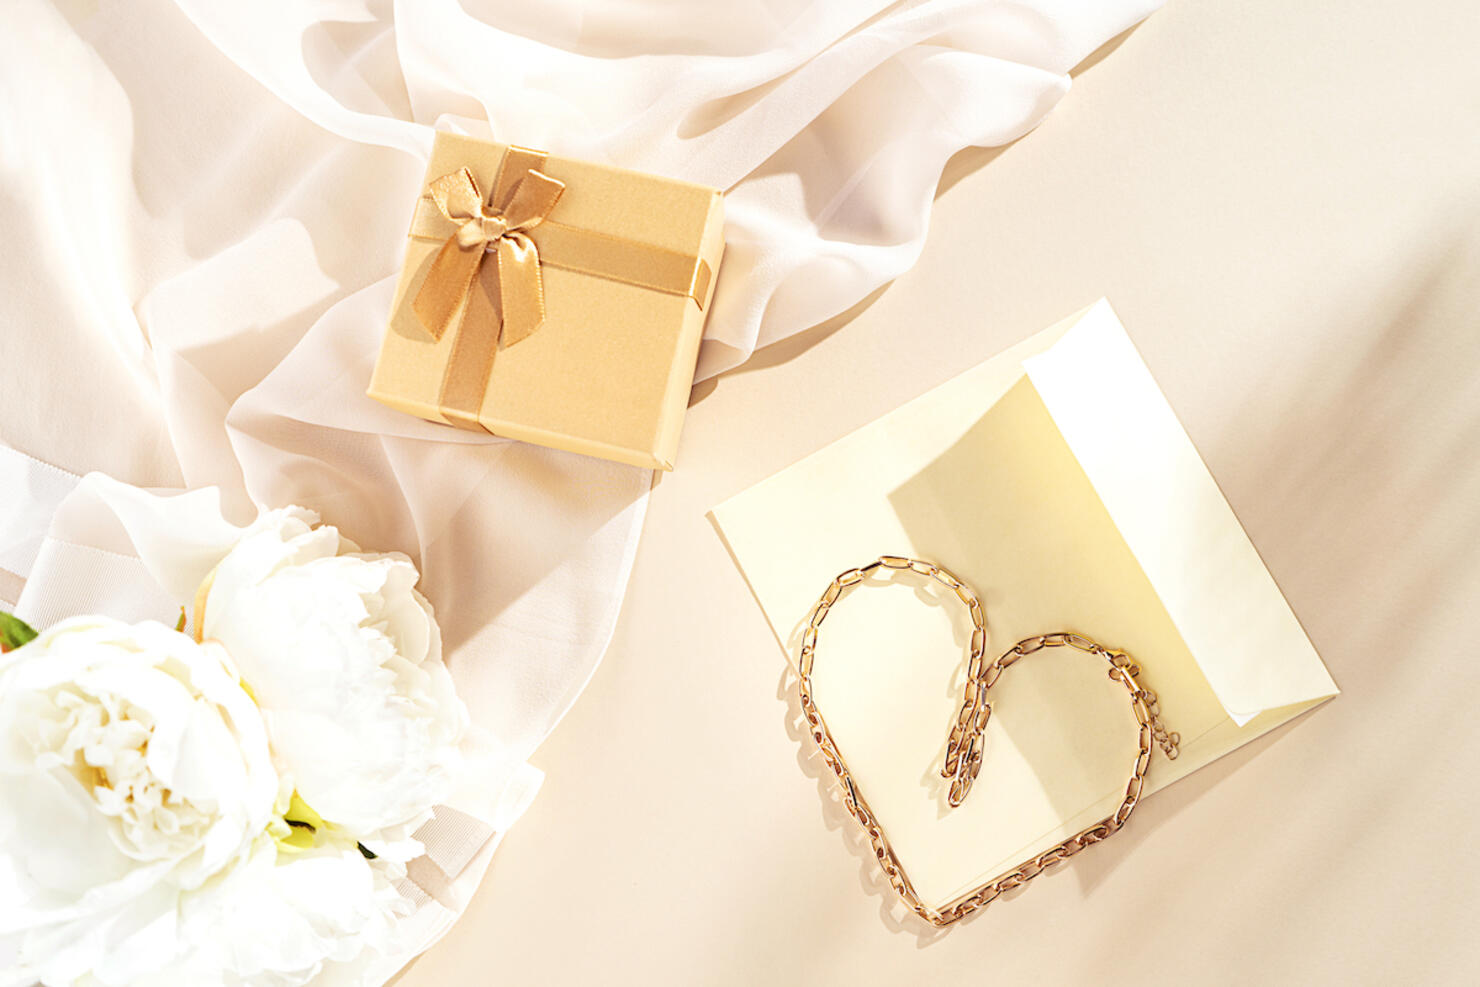 Concept of beauty gift on Valentine's Day.